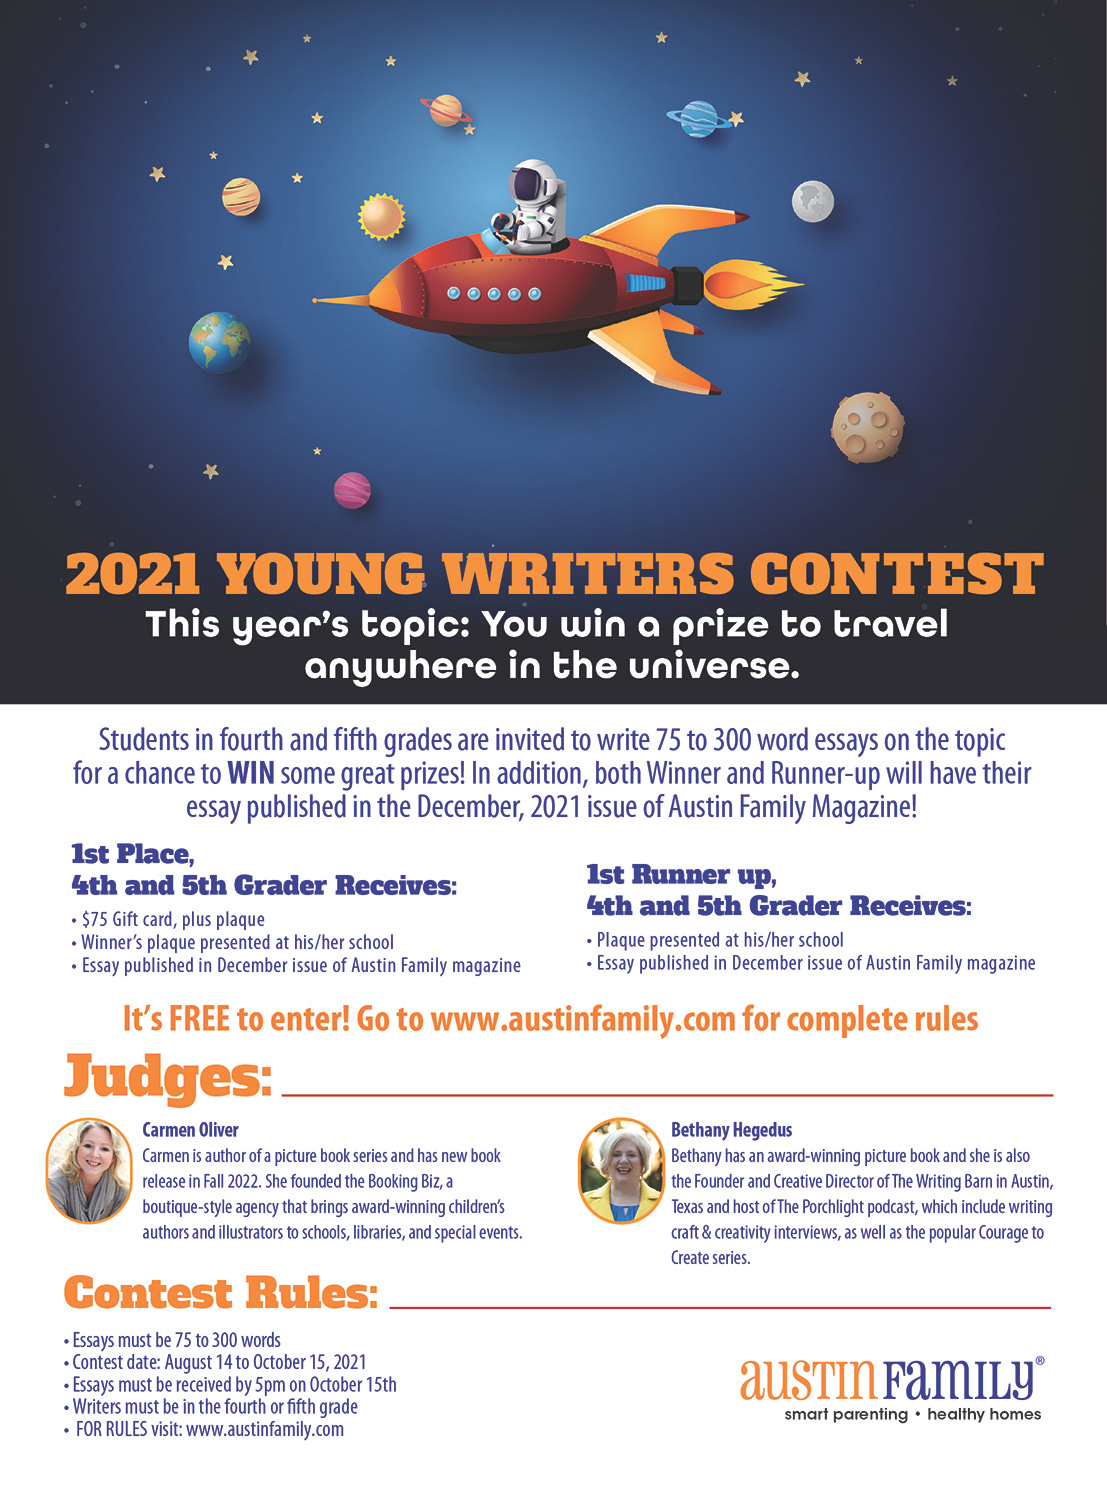 A flyer depicting an astronaut riding through the dark blue galaxy and planets in a red spaceship. Text reads: All 4th and 5th graders are welcome to enter their 75-300 word essays. First place winners  receive: $75 Gift Card, A personalized plaque presented at your school, Your essay will be published in Austin Family magazine December 2021. First runners-up receive A personalized plaque presented at your school, Your essay will be published in Austin Family magazine December 2021. The topic is: “You just won a prize to travel anywhere in the universe!” The Contest Rules are: Essays must be 75 to 300 words, Entries must be submitted no earlier than August 15 and no later than 5 p.m. on October 15, 2021. Writers must be in the fourth or fifth grade. 